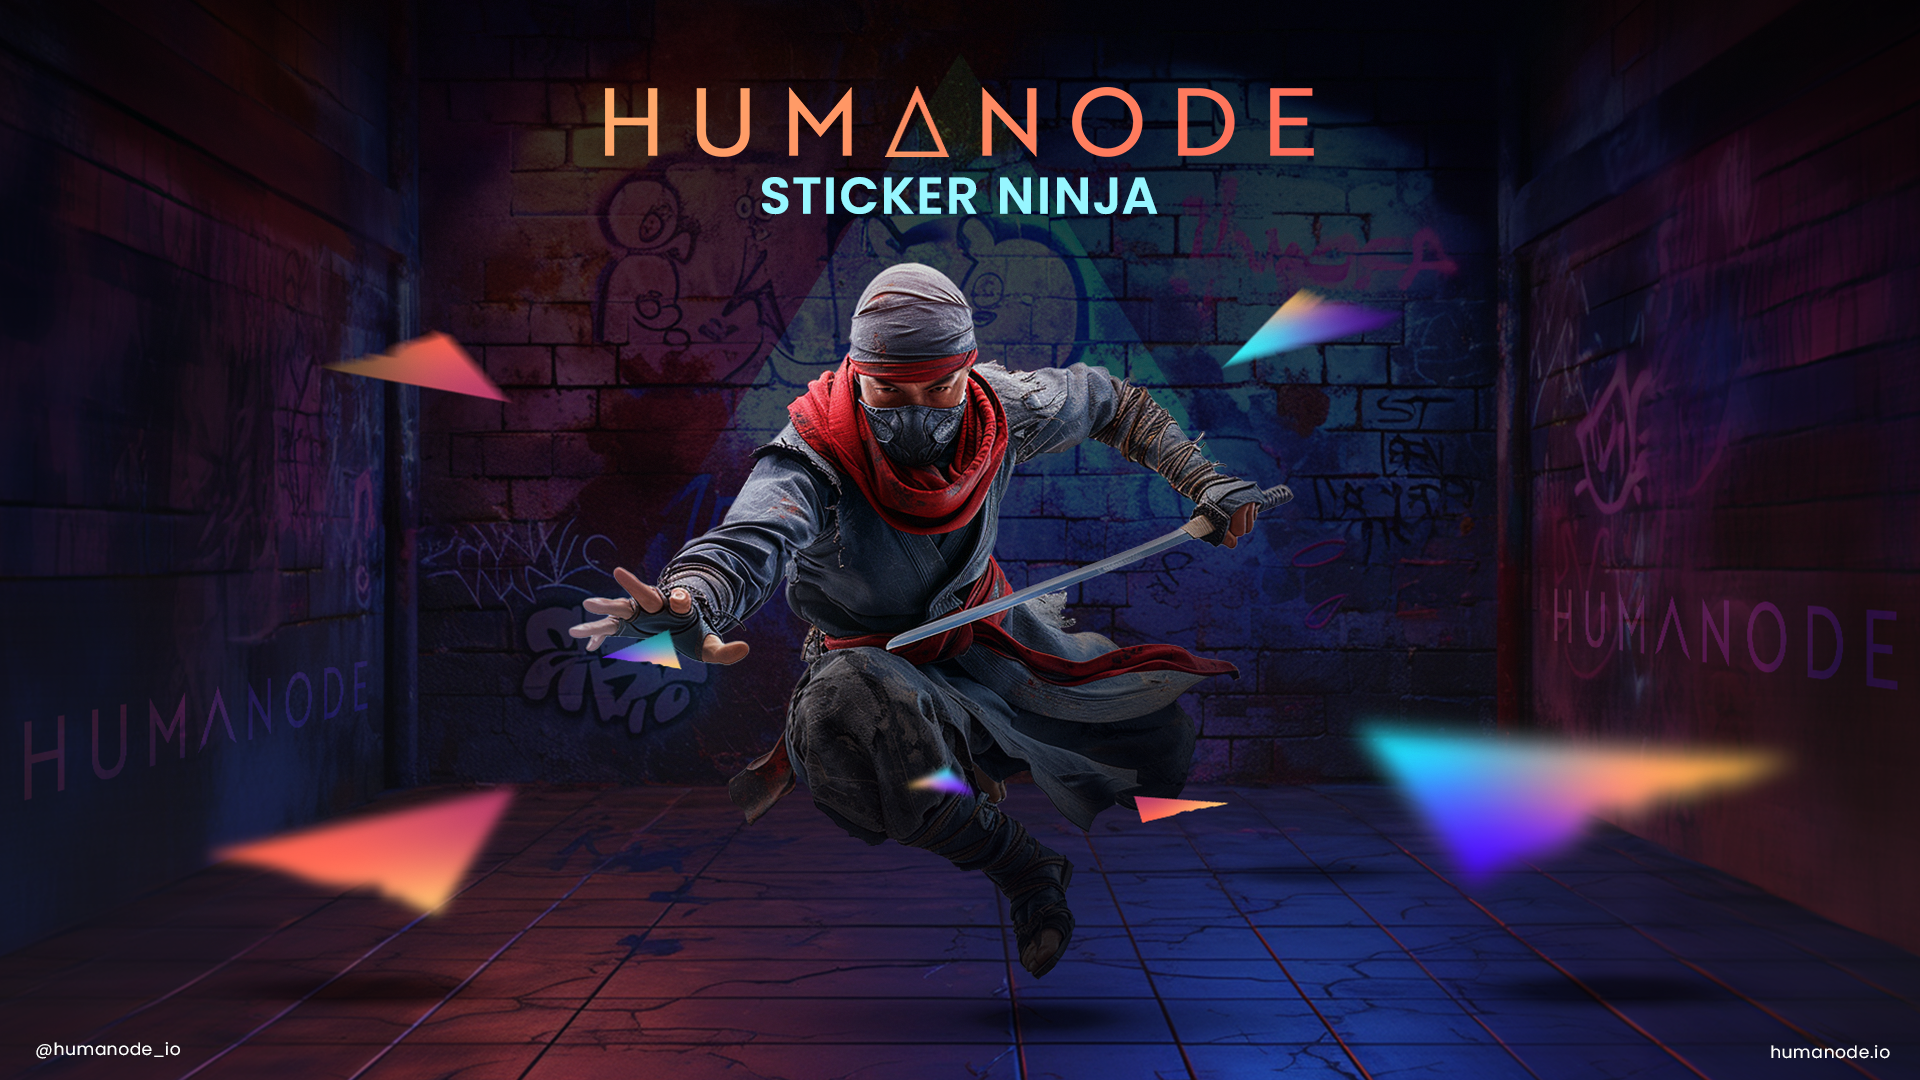 Stick, Snap, and Share! Welcome to the Humanode Sticker Challenge